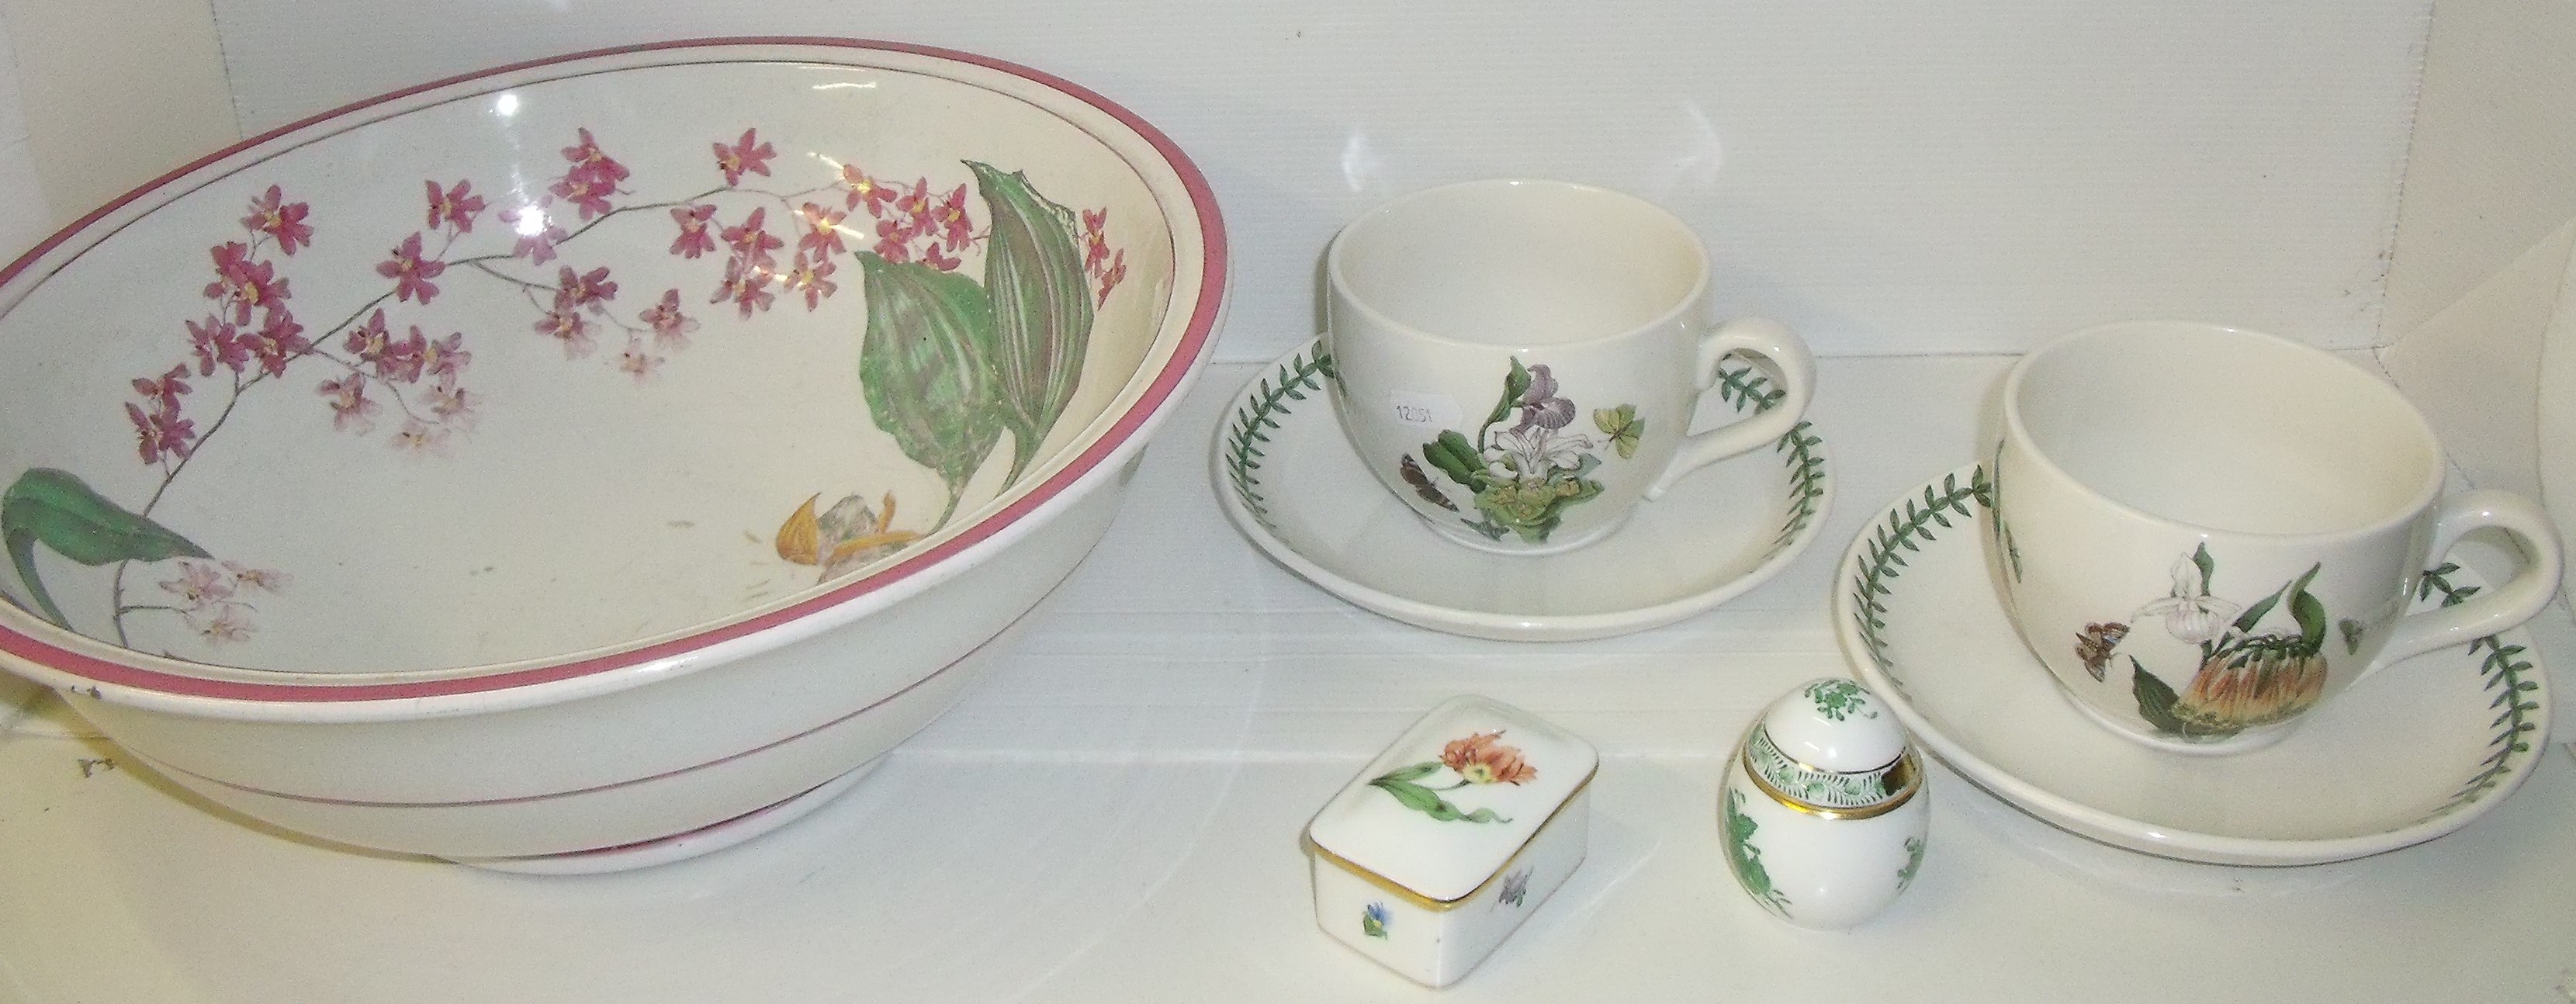 Two large Portmerion breakfast cups and saucers designed by Susan Williams-Ellis,